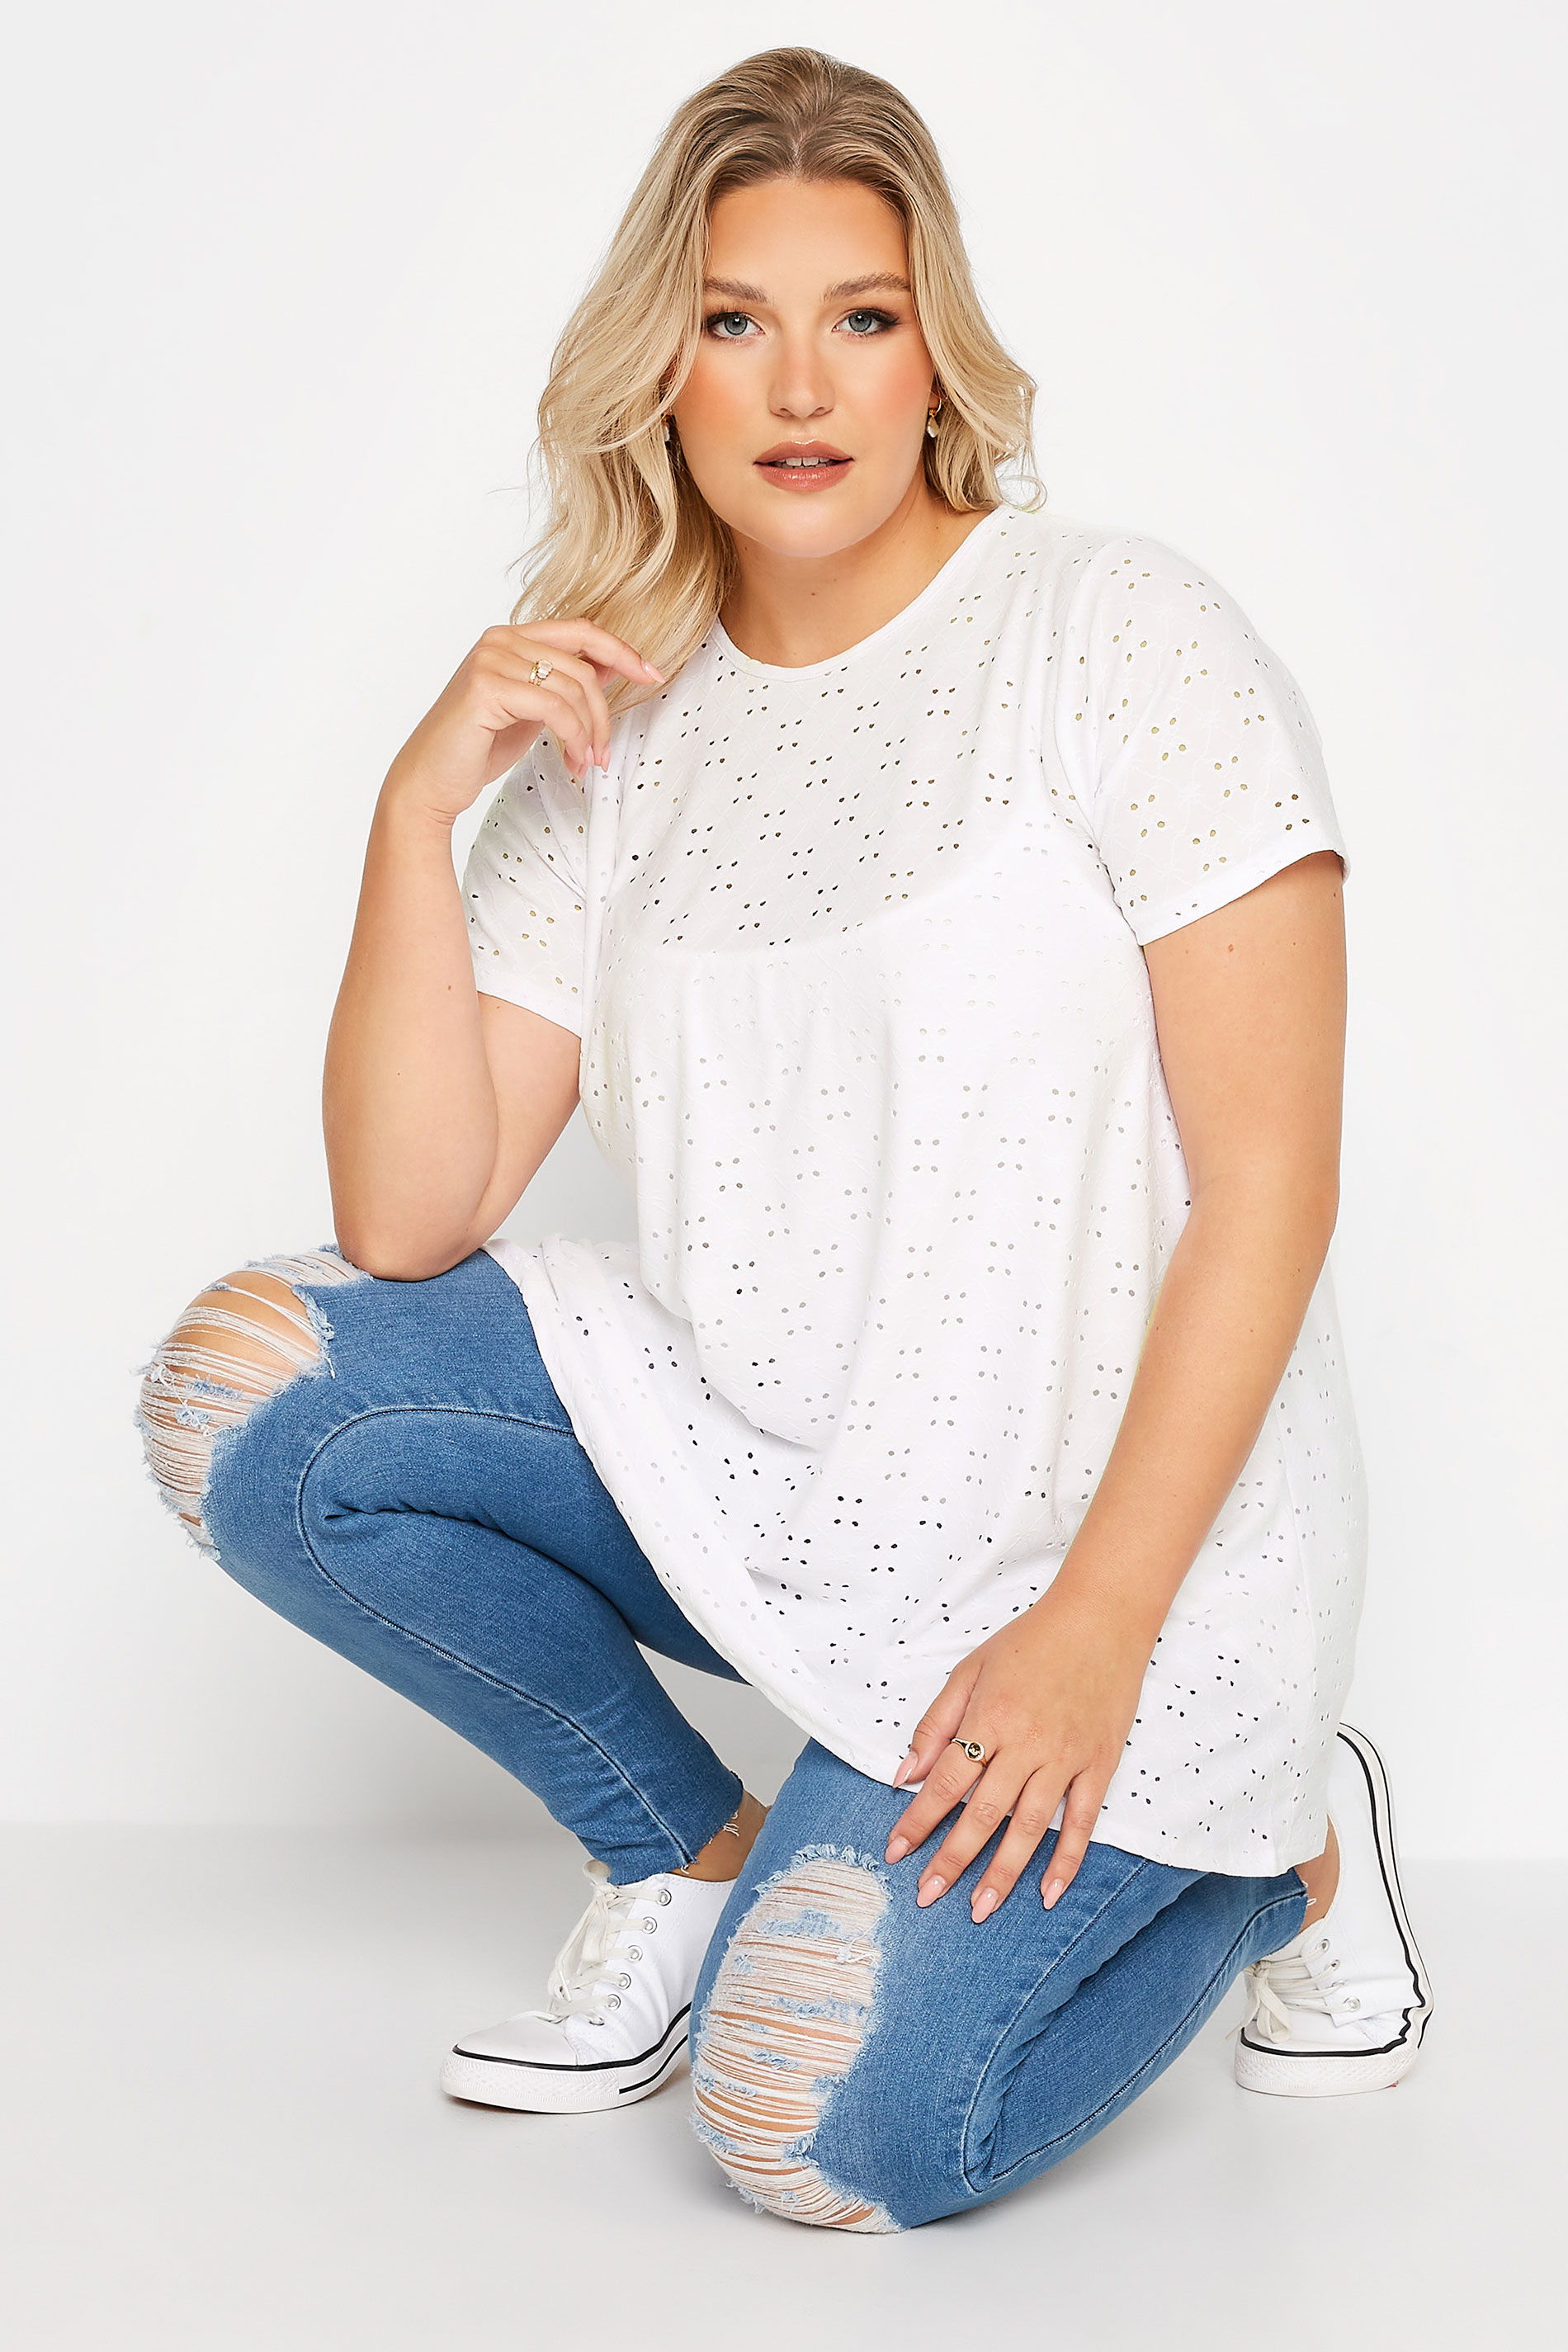 Grande taille  Tops Grande taille  Tops Casual | T-Shirt Blanc Broderie Anglaise en Volanté - SK73537